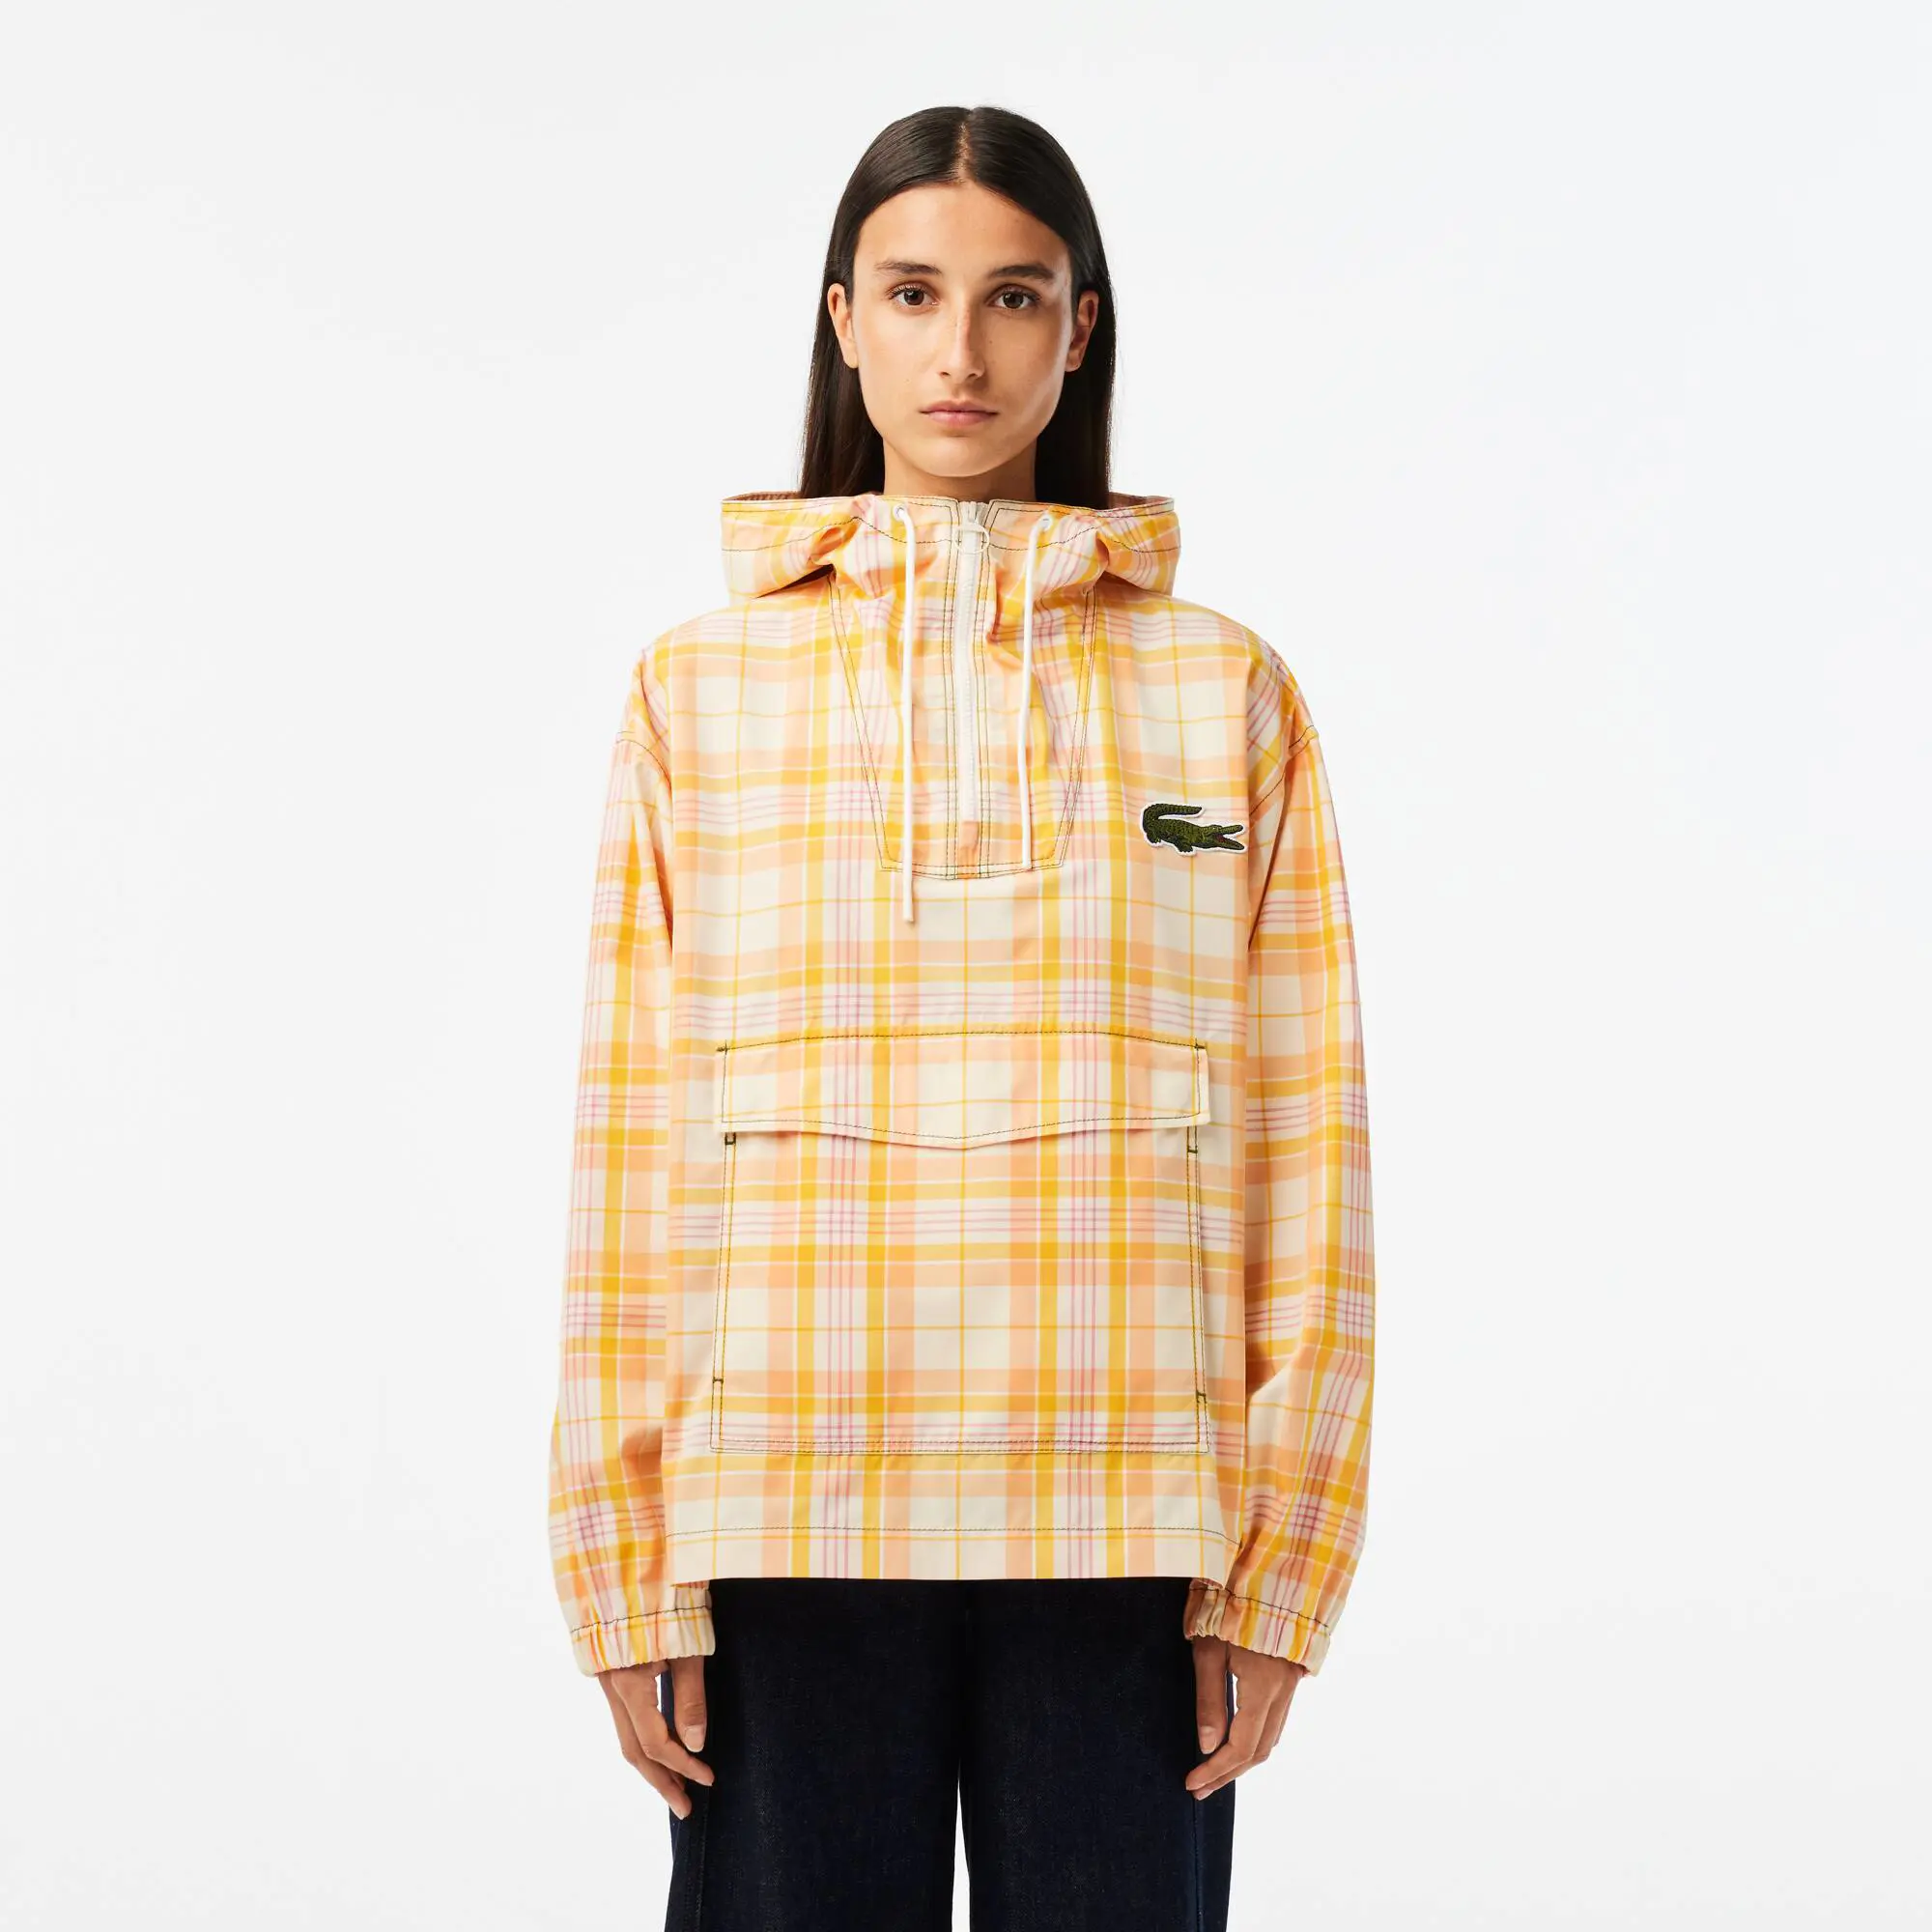 Lacoste Women’s Checked Pull-Over Jacket. 1